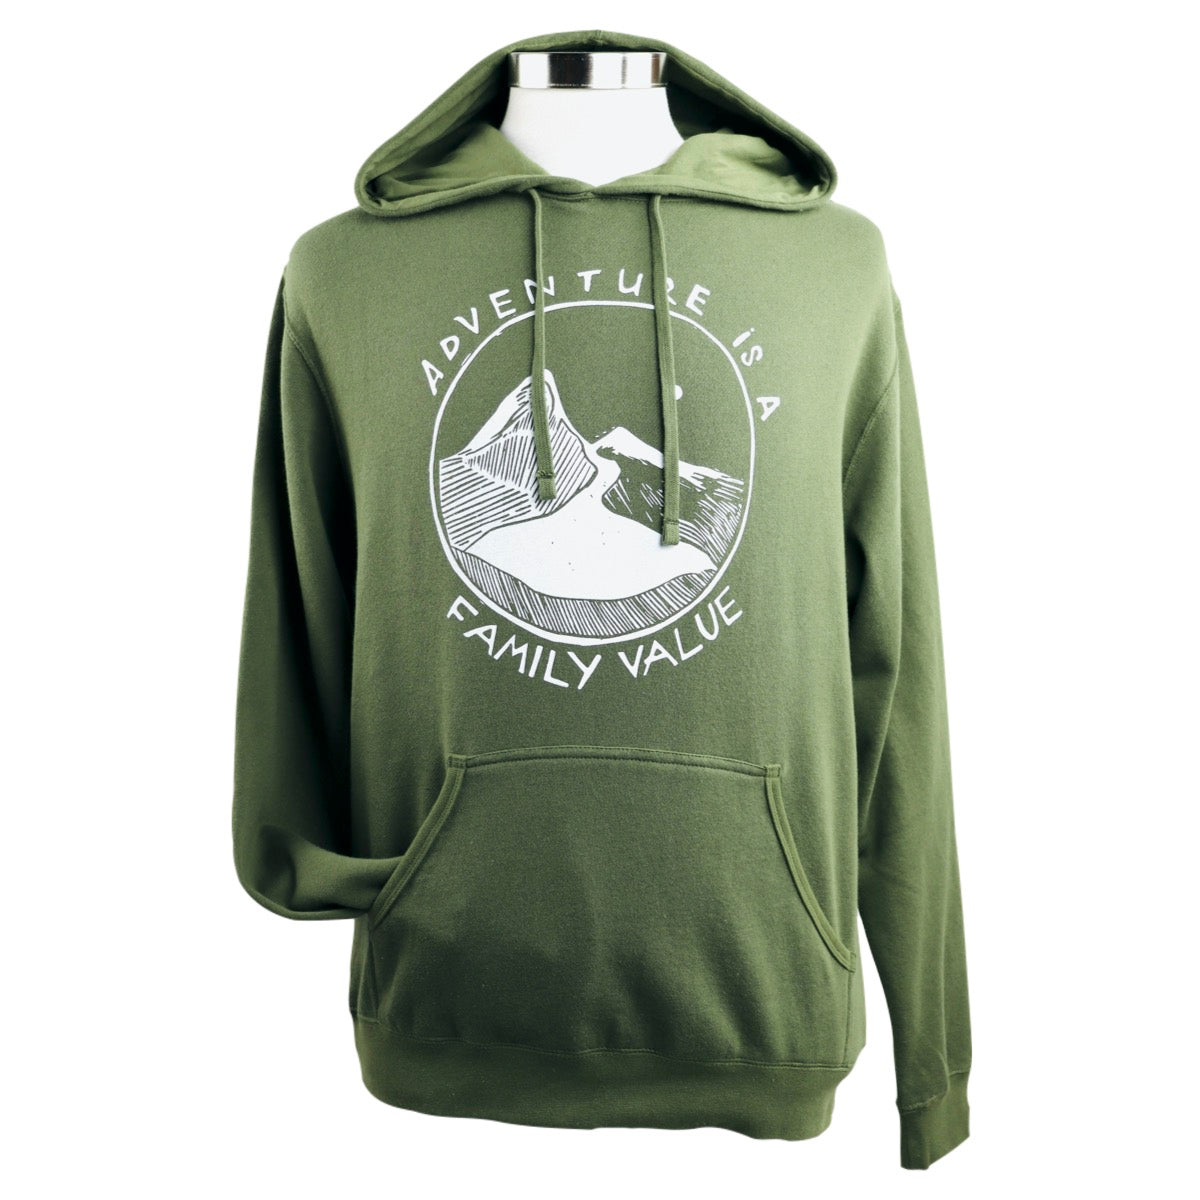 Adventure is a Family Value Midweight Pullover Hoodie in Dark Olive